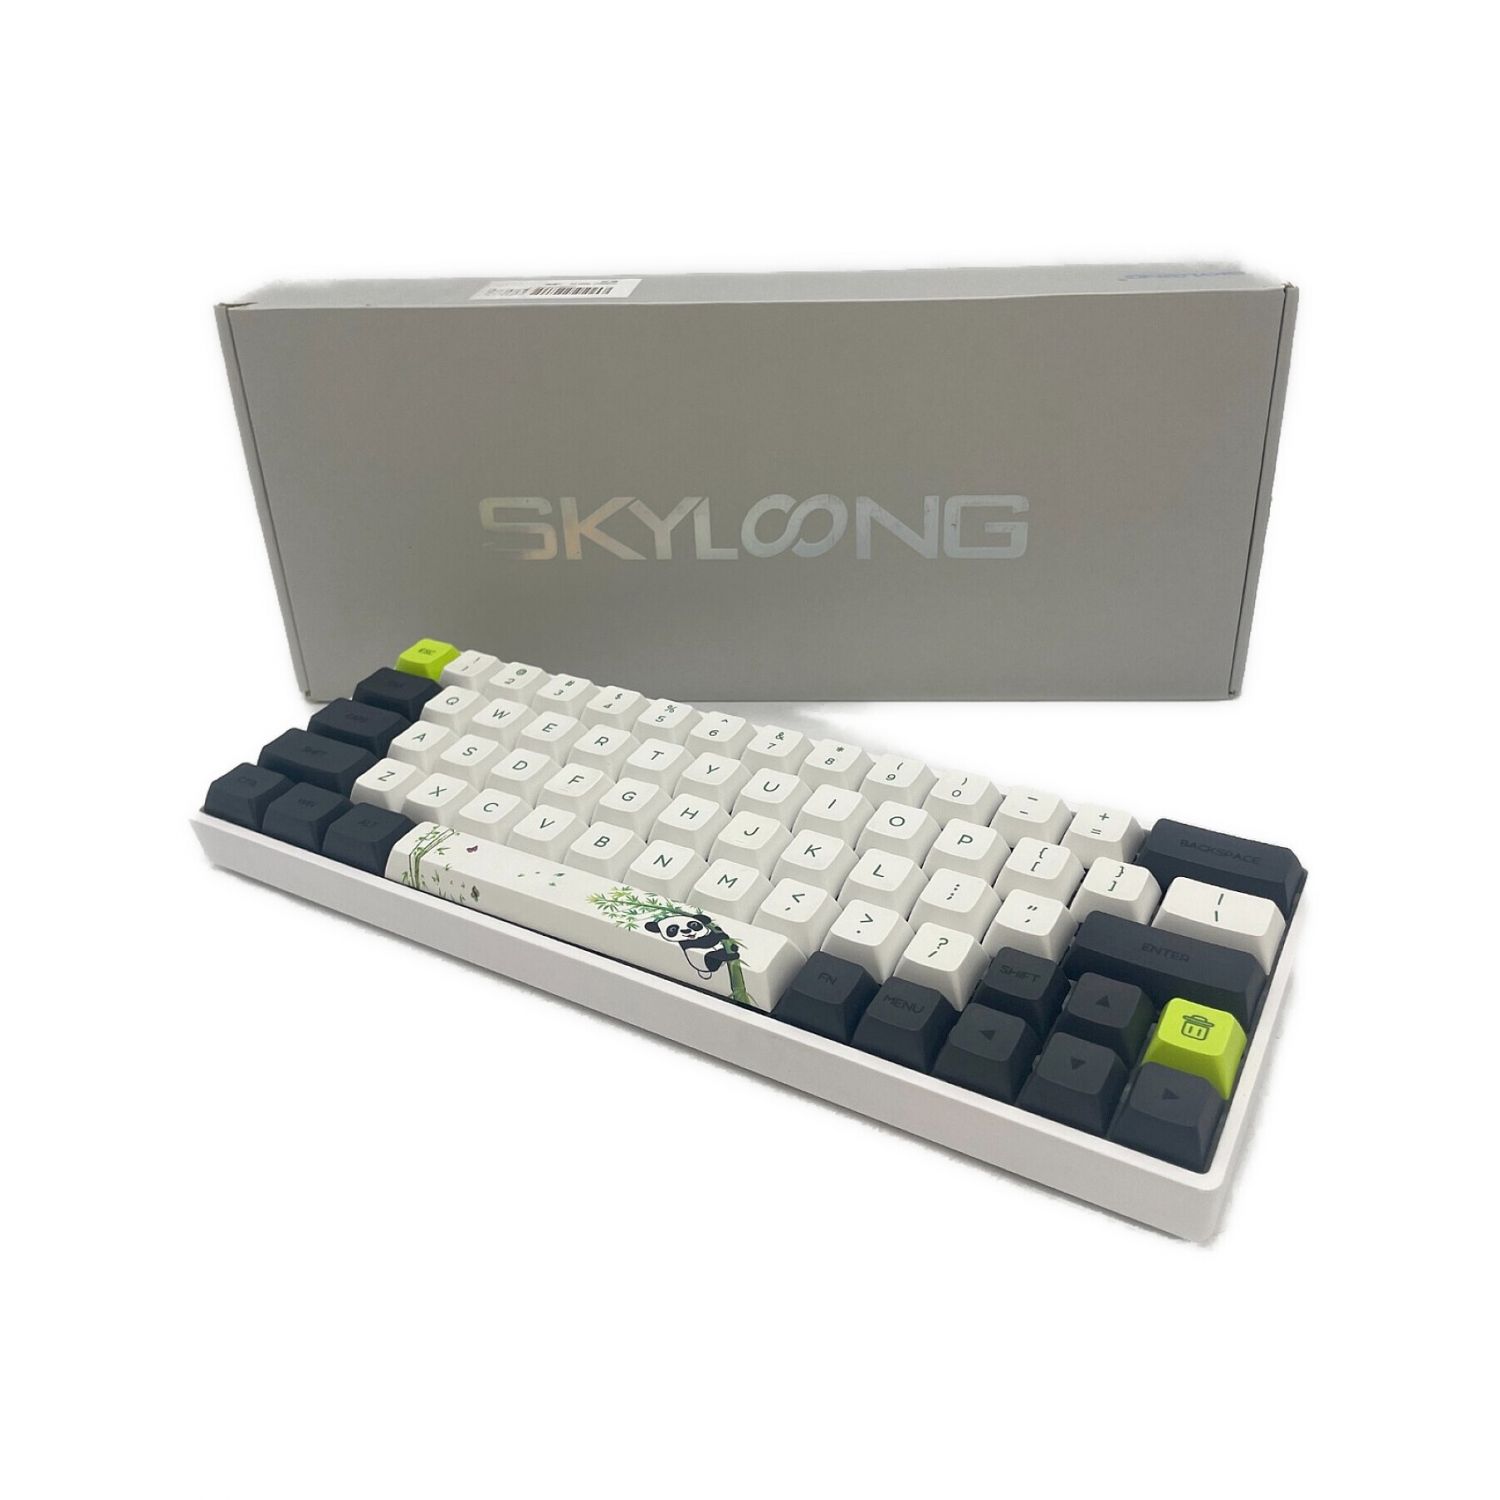 SKYLOONG キーボード